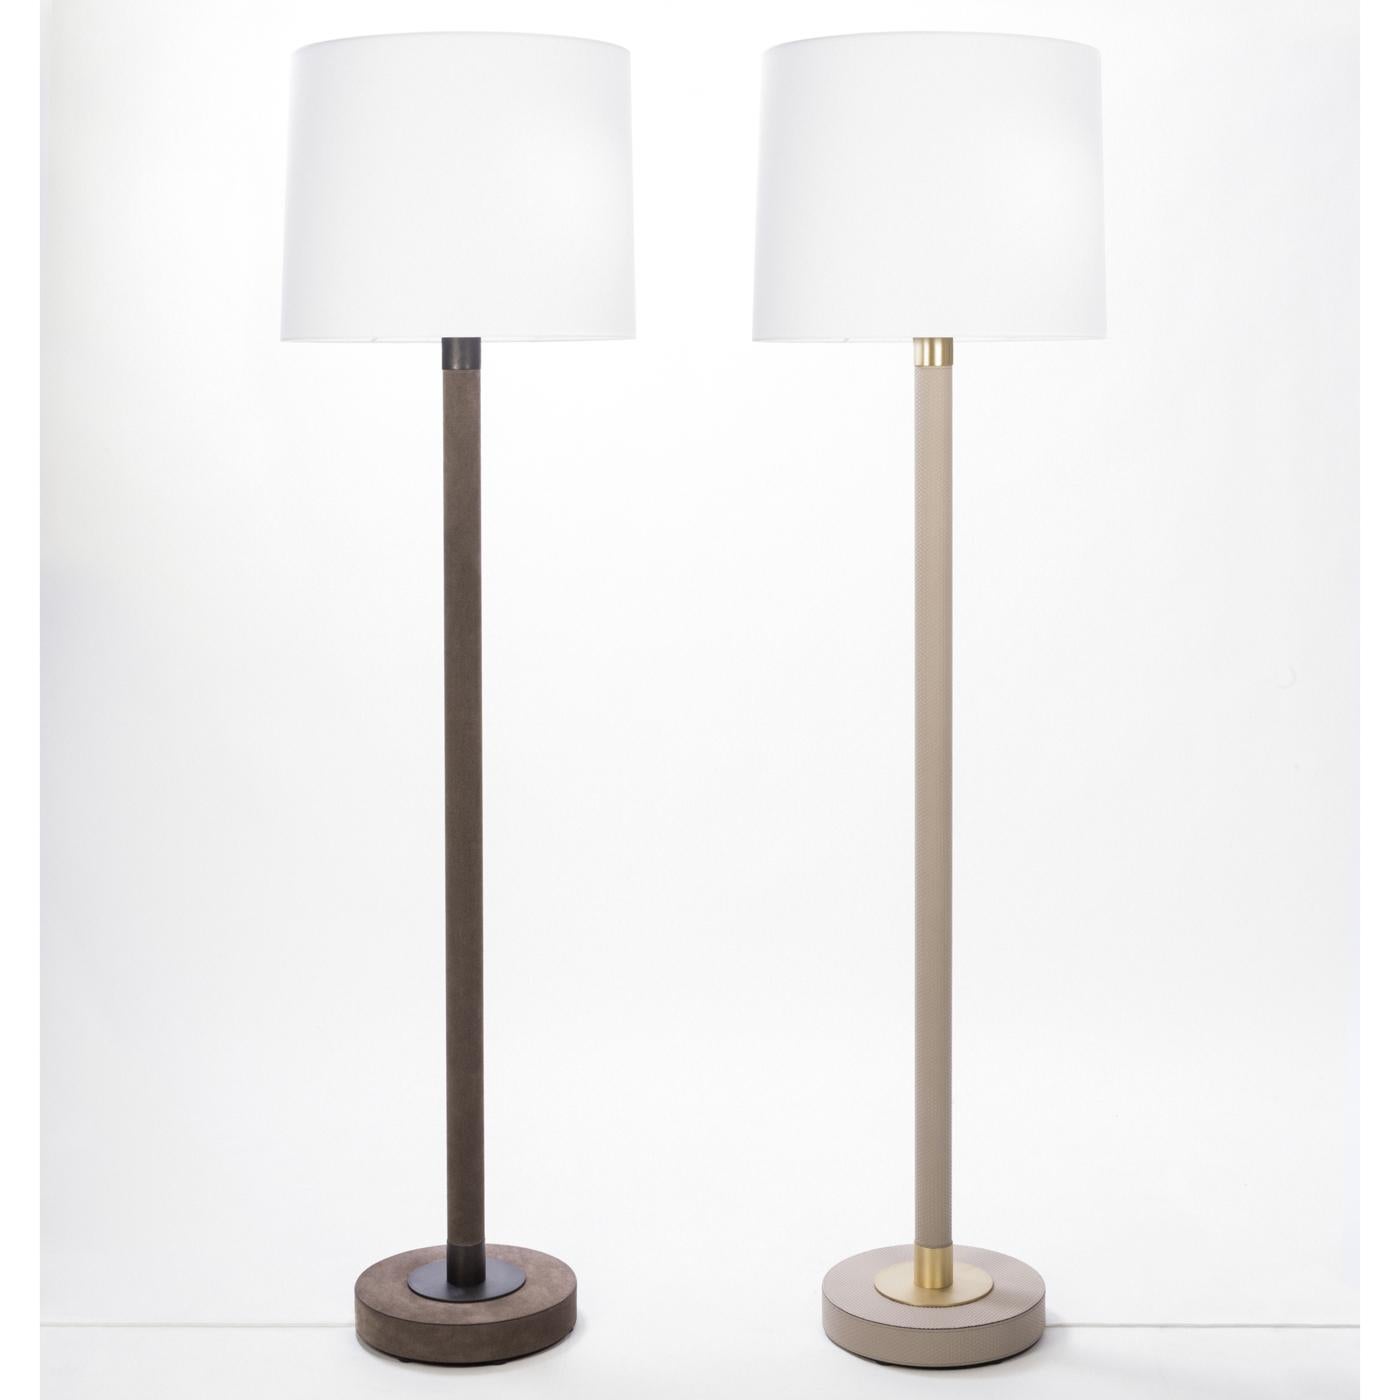 This sophisticated floor lamp is a stunning addition to a modern decor, where it can be used anywhere in the house. Its wooden structure features an in-line foot switch, a round base, and an elongated central stem upholstered in leather with